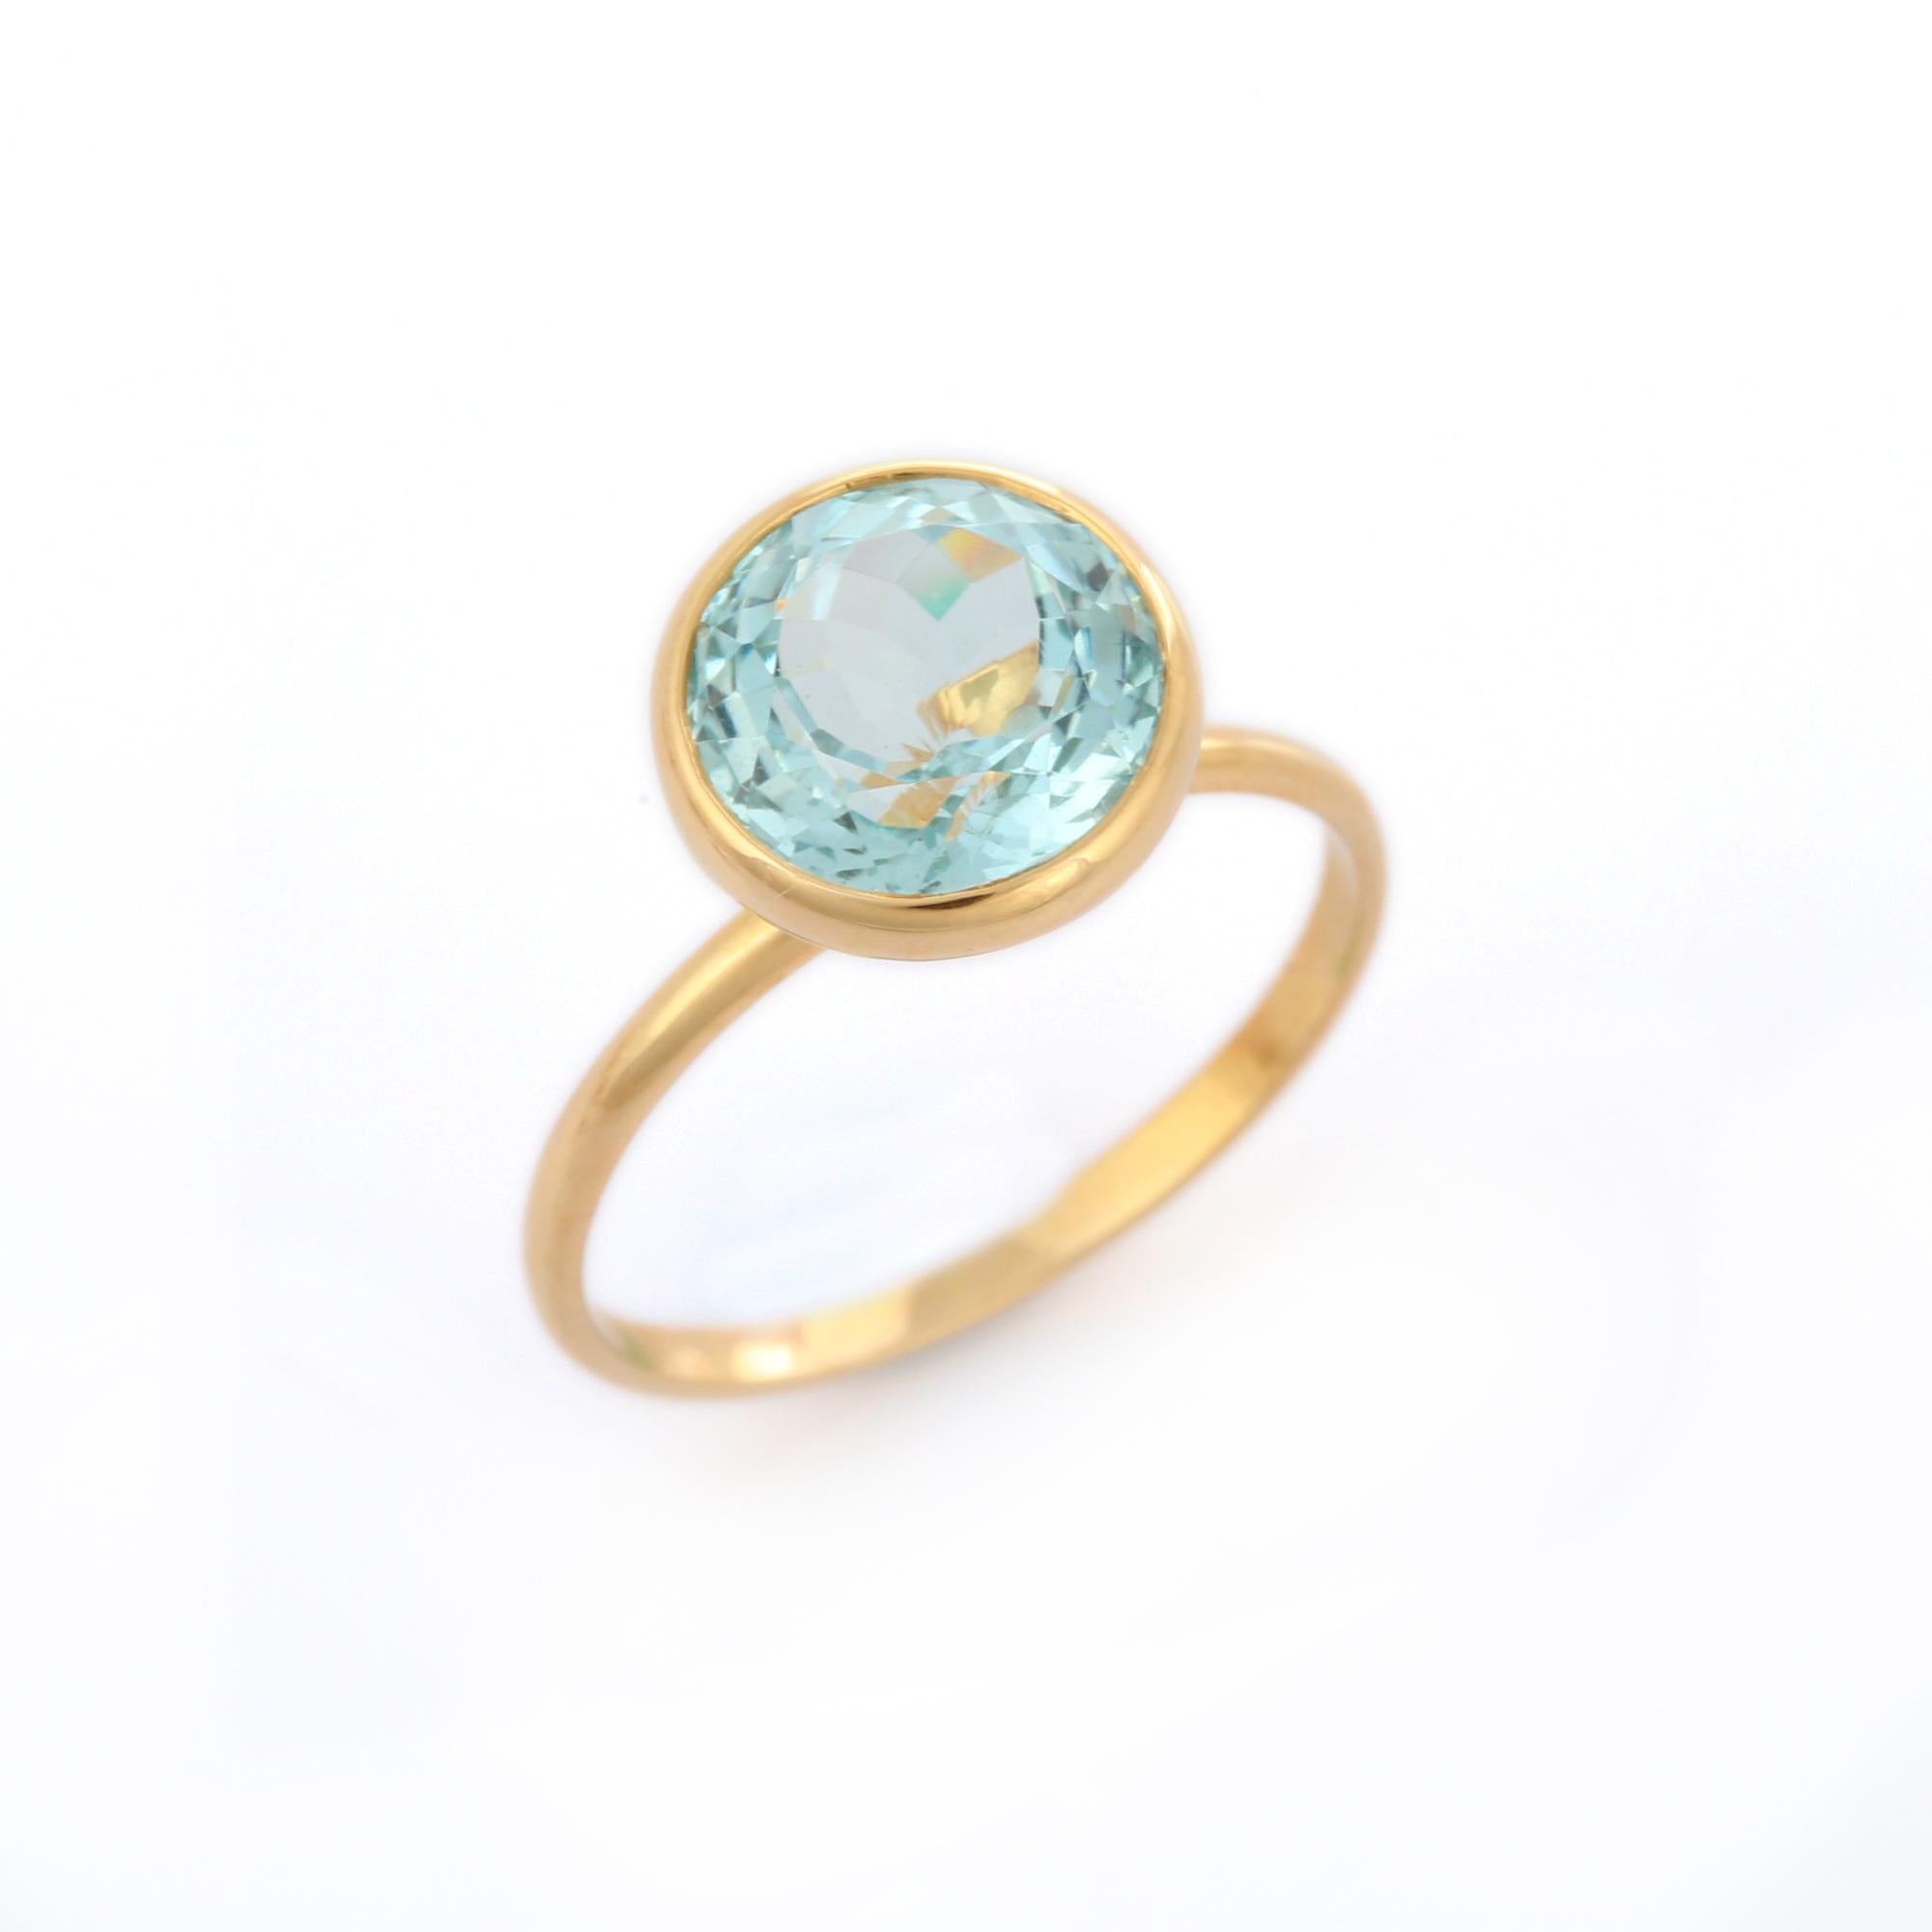 For Sale:  3.28 Carat Aquamarine Round Cut Cocktail Ring in 18K Yellow Gold 7